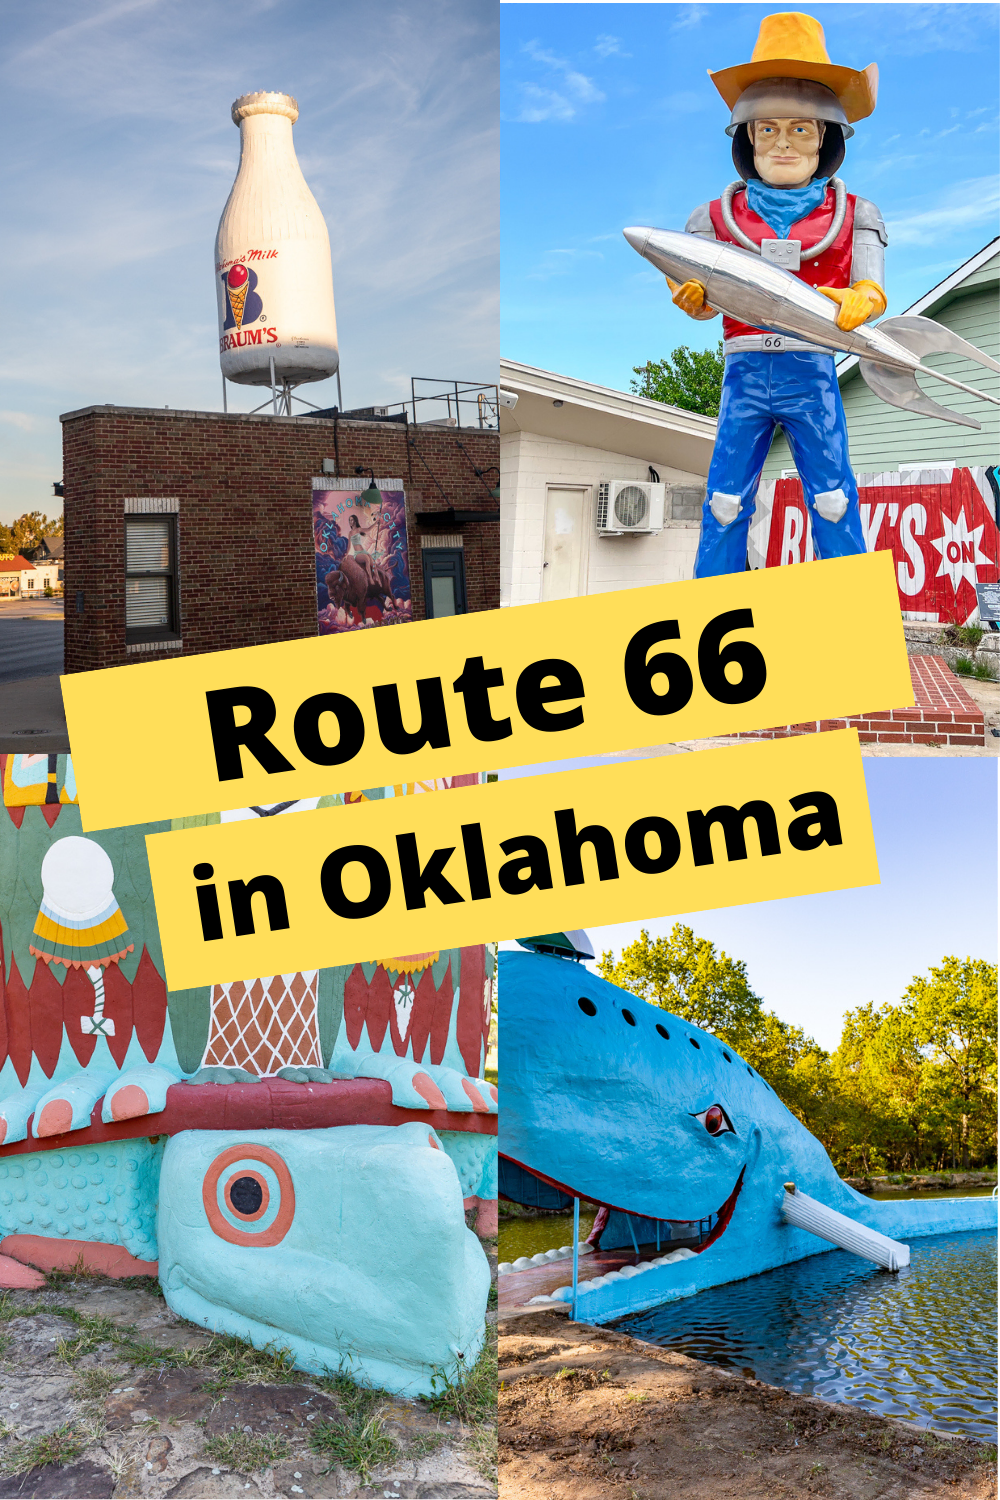 If you’re looking for classic roadside attractions, iconic diners, informative museums, and nostalgic nods to the past, a road trip on Route 66 in Oklahoma offers everything you’re looking for. Pull over at any and all of the stops on this complete list of Oklahoma Route 66 Attractions and start planning your road trip on the Mother Road today. #Route66 #Oklahoma #Route66RoadTrip #OklahomaRoute66 #OklahomaRoute66RoadTrip #OklahomaRoadTrip #travel #RoadTrip